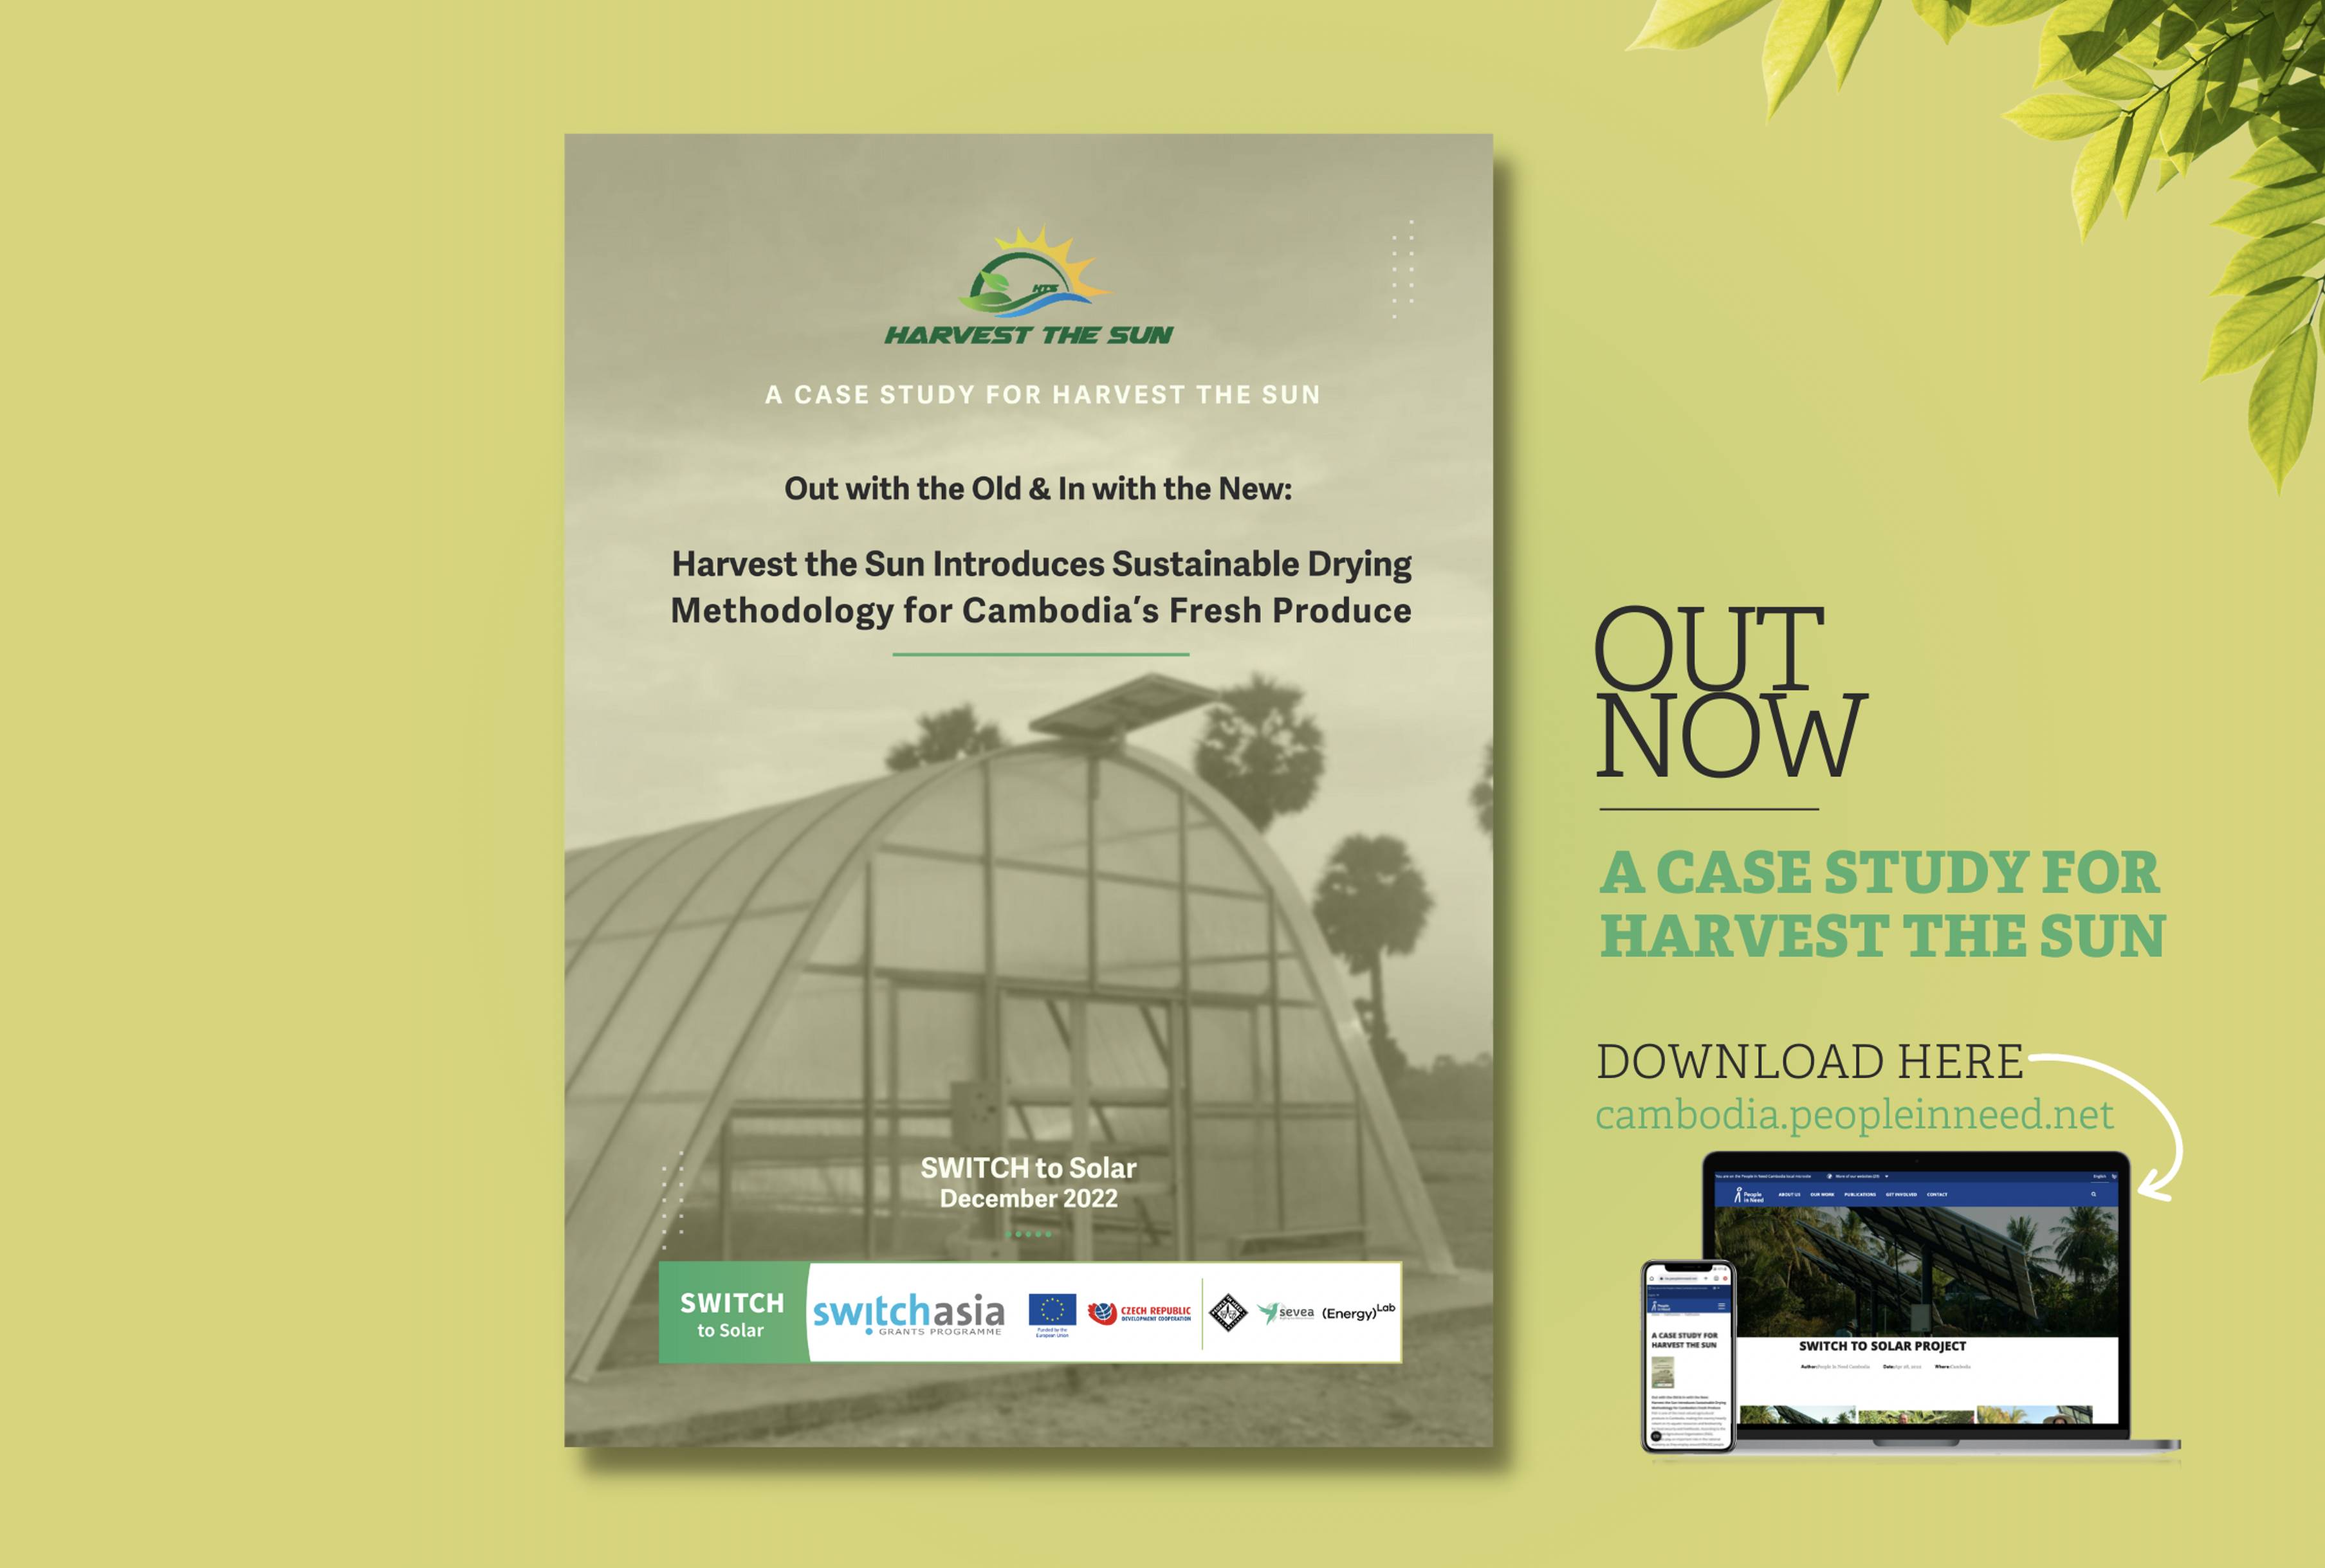 Harvest the Sun introduces sustainable drying methodology for Cambodia's fresh produce